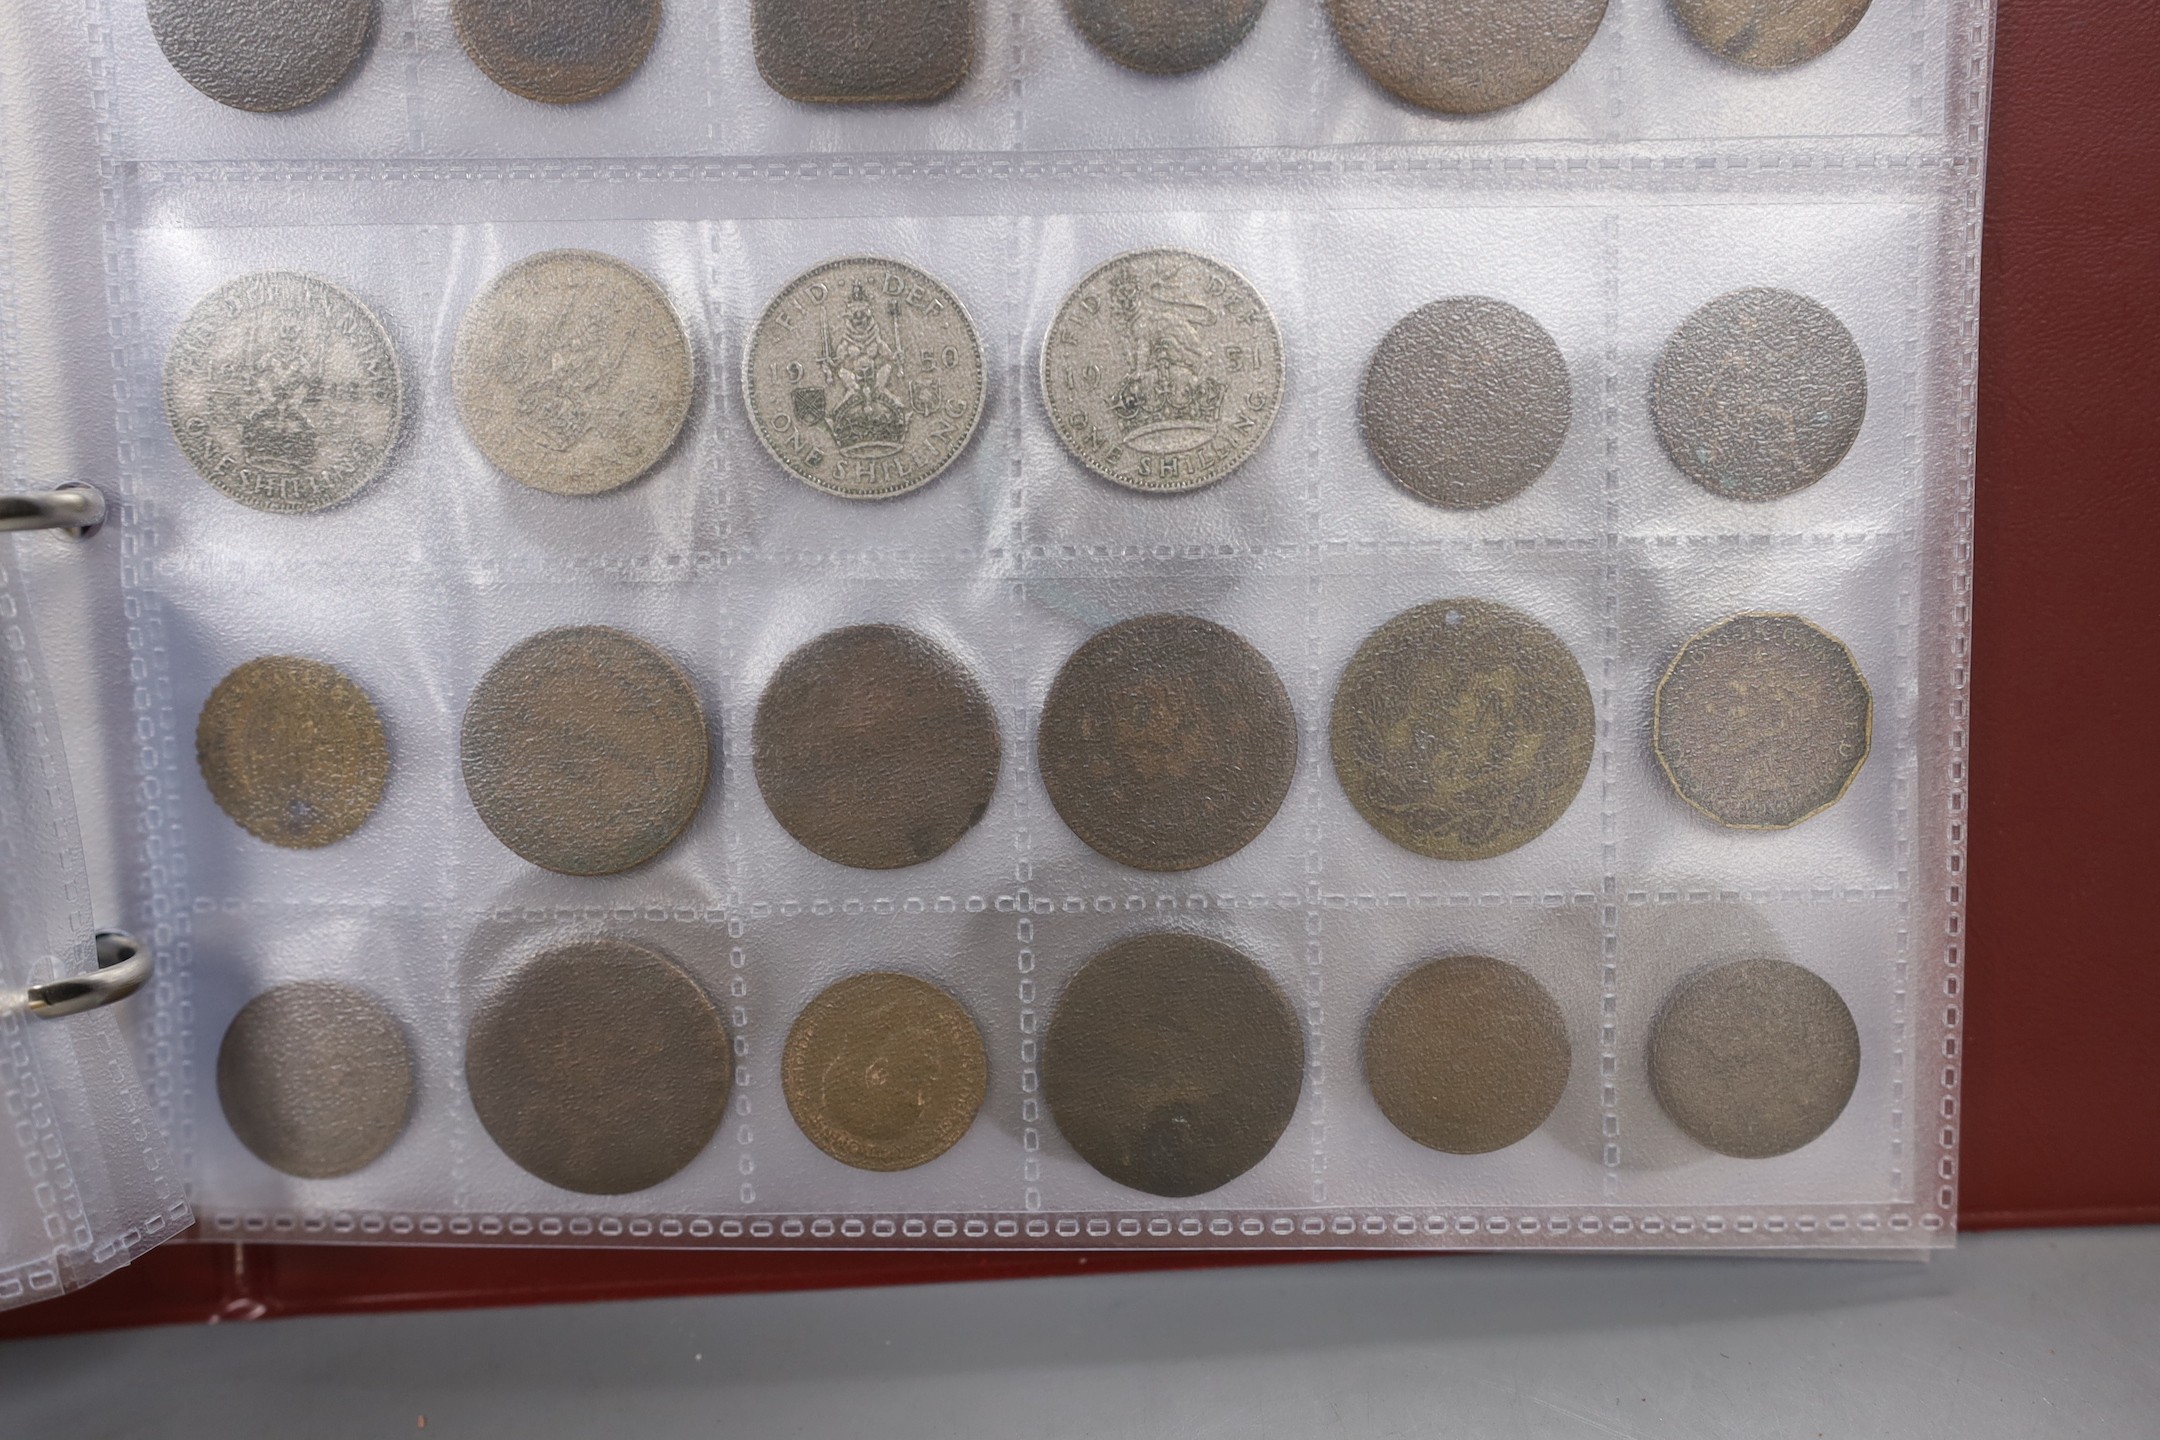 An album of British, Commonwealth and world coins including